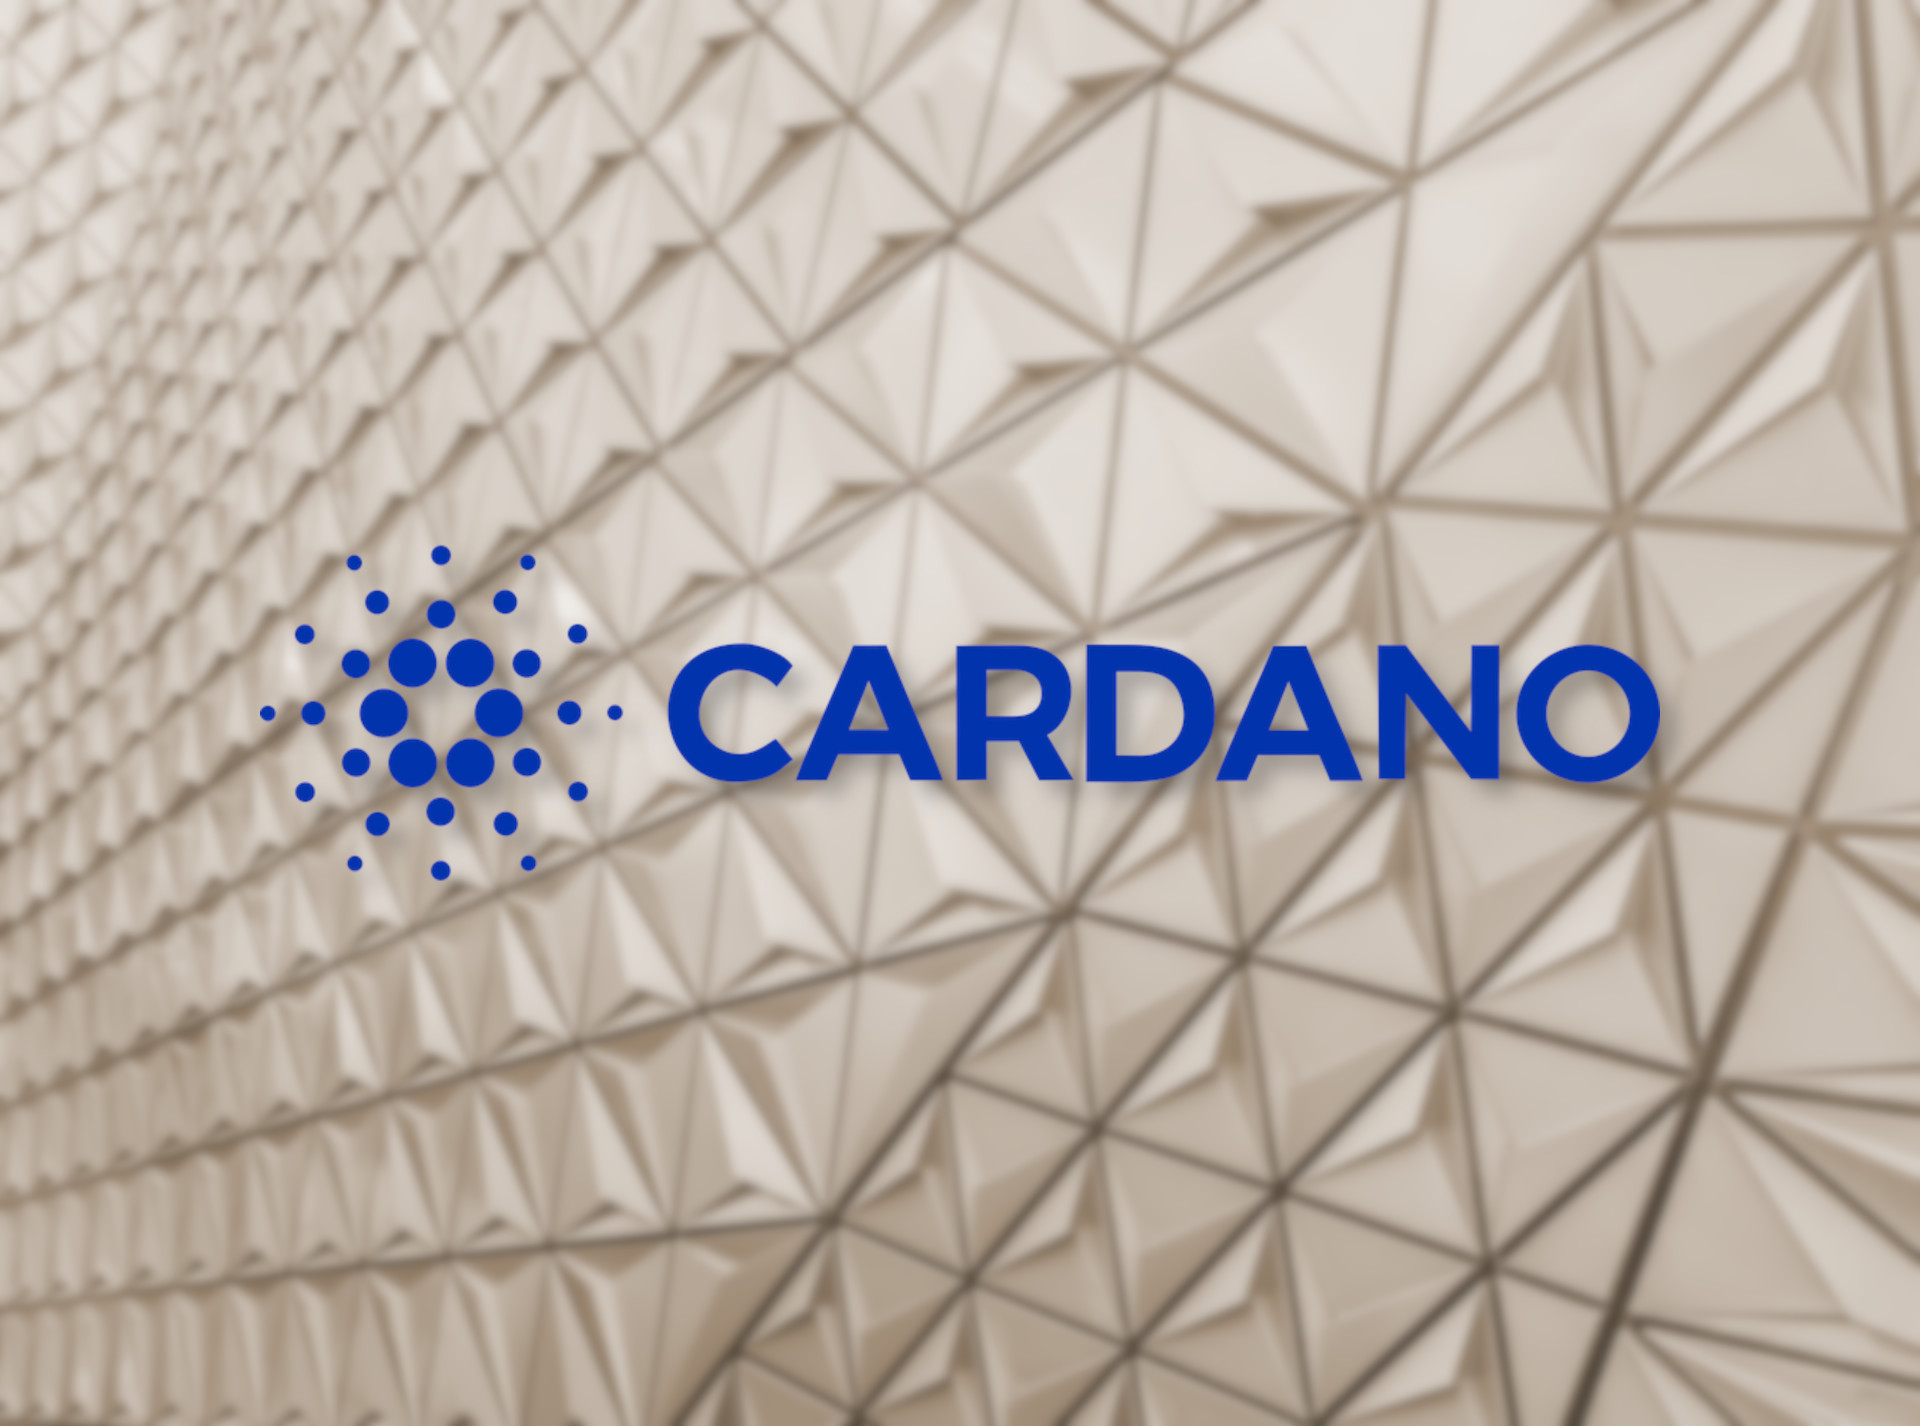 Cardano (ADA) cryptocurrency cover image